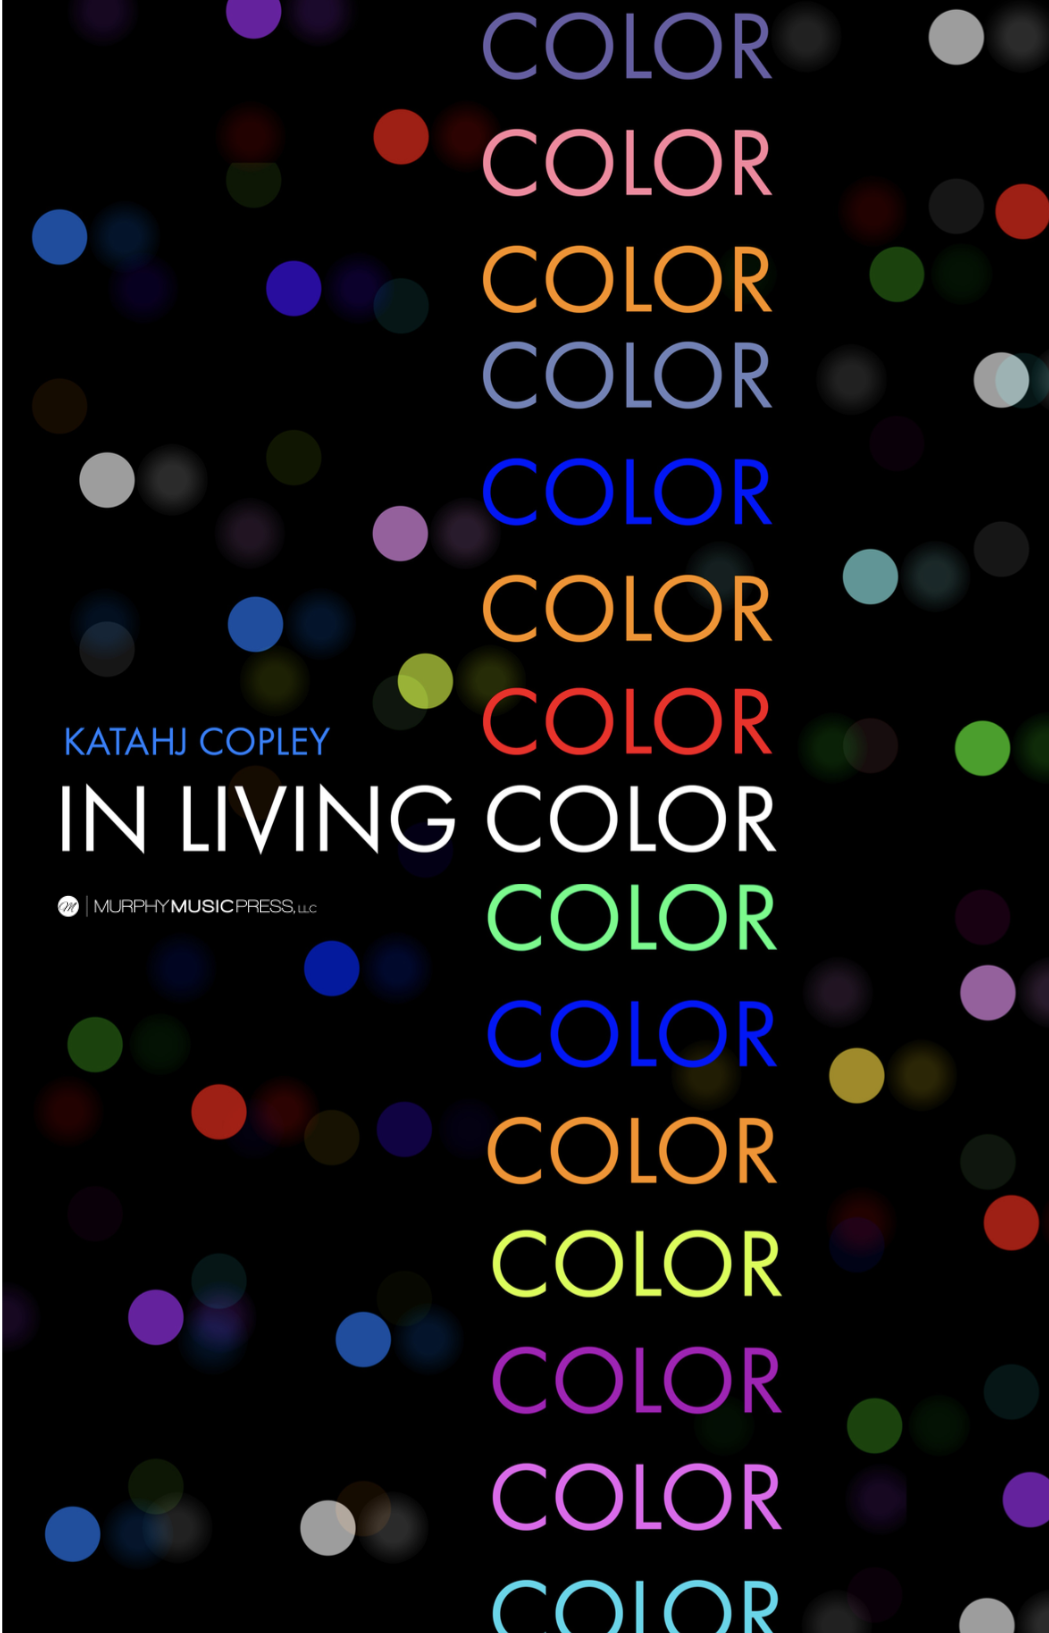 In Living Color by Katahj Copley